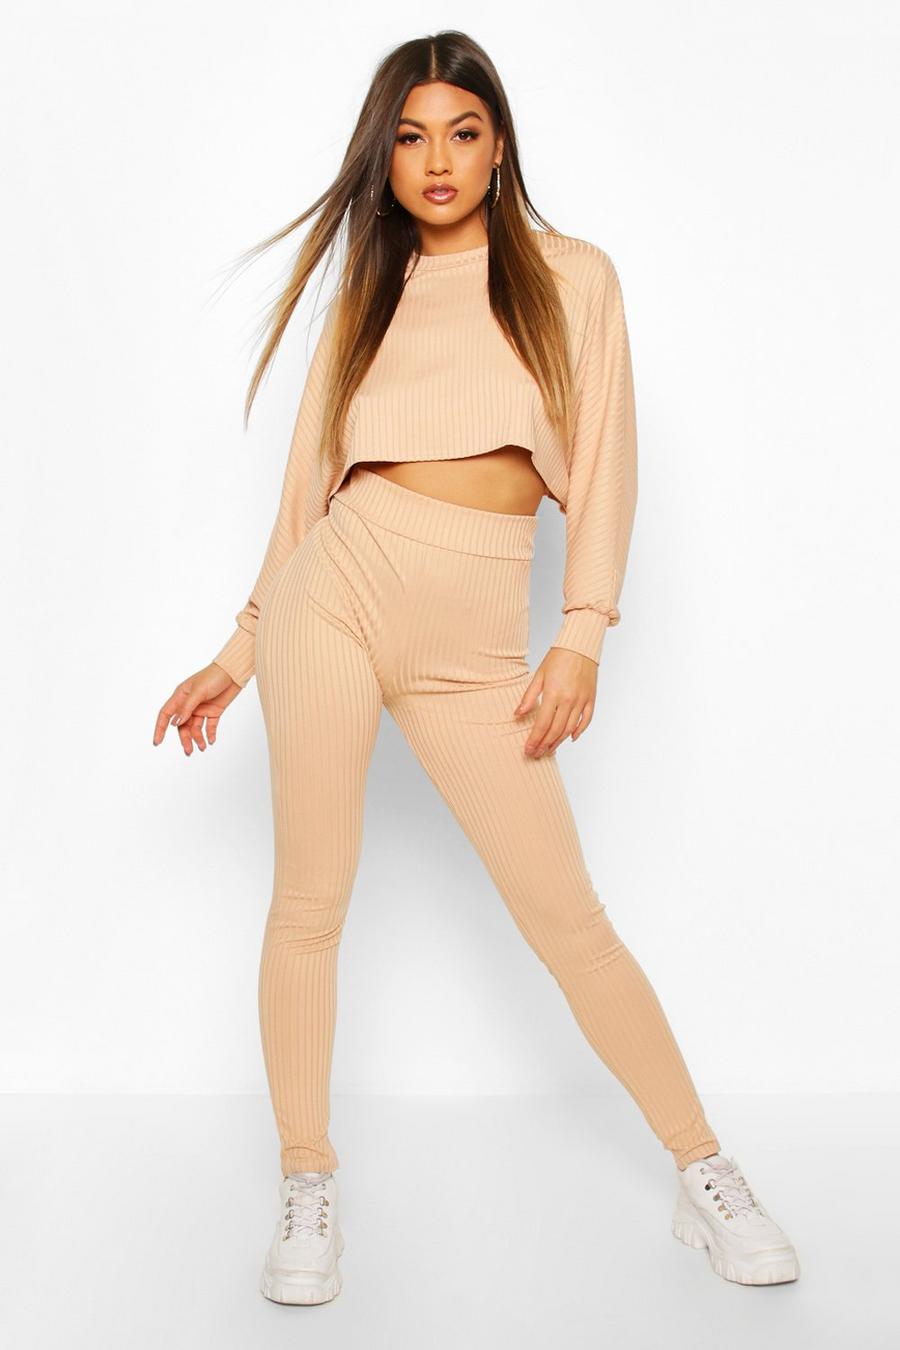 Stone Rib Knitted Oversized Top And Legging Co-Ord Set image number 1